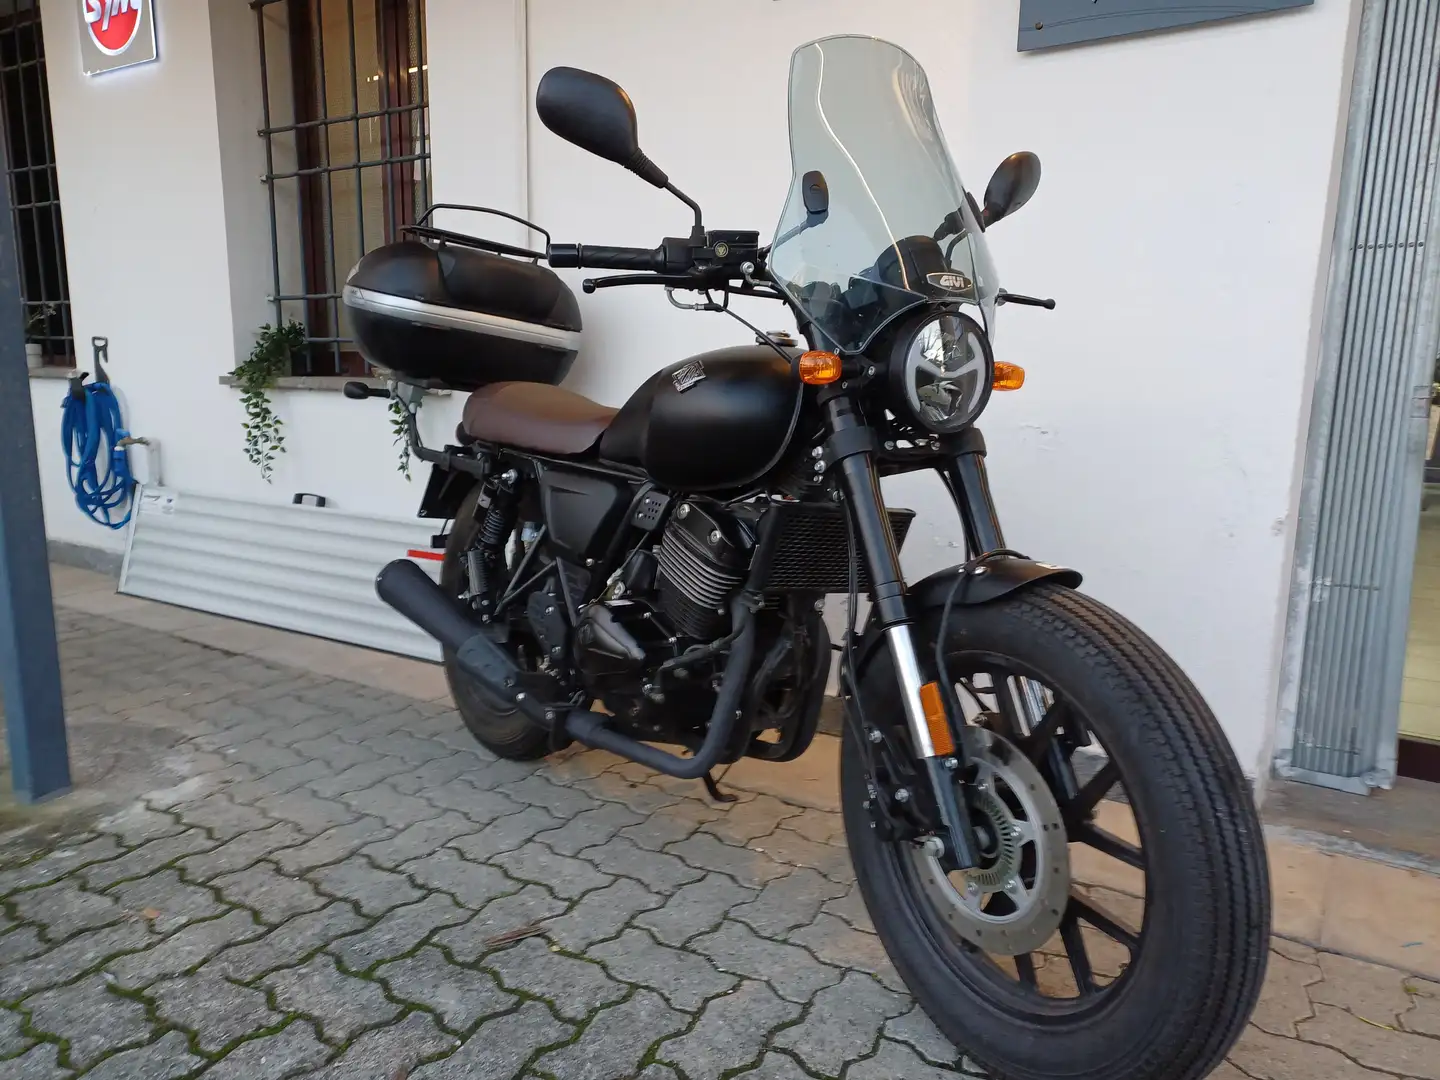 Archive Motorcycle Cafe Racer 250 ARCHIVE CAFE' RACER 250 ANNO 2021 KM 7350 Nero - 1